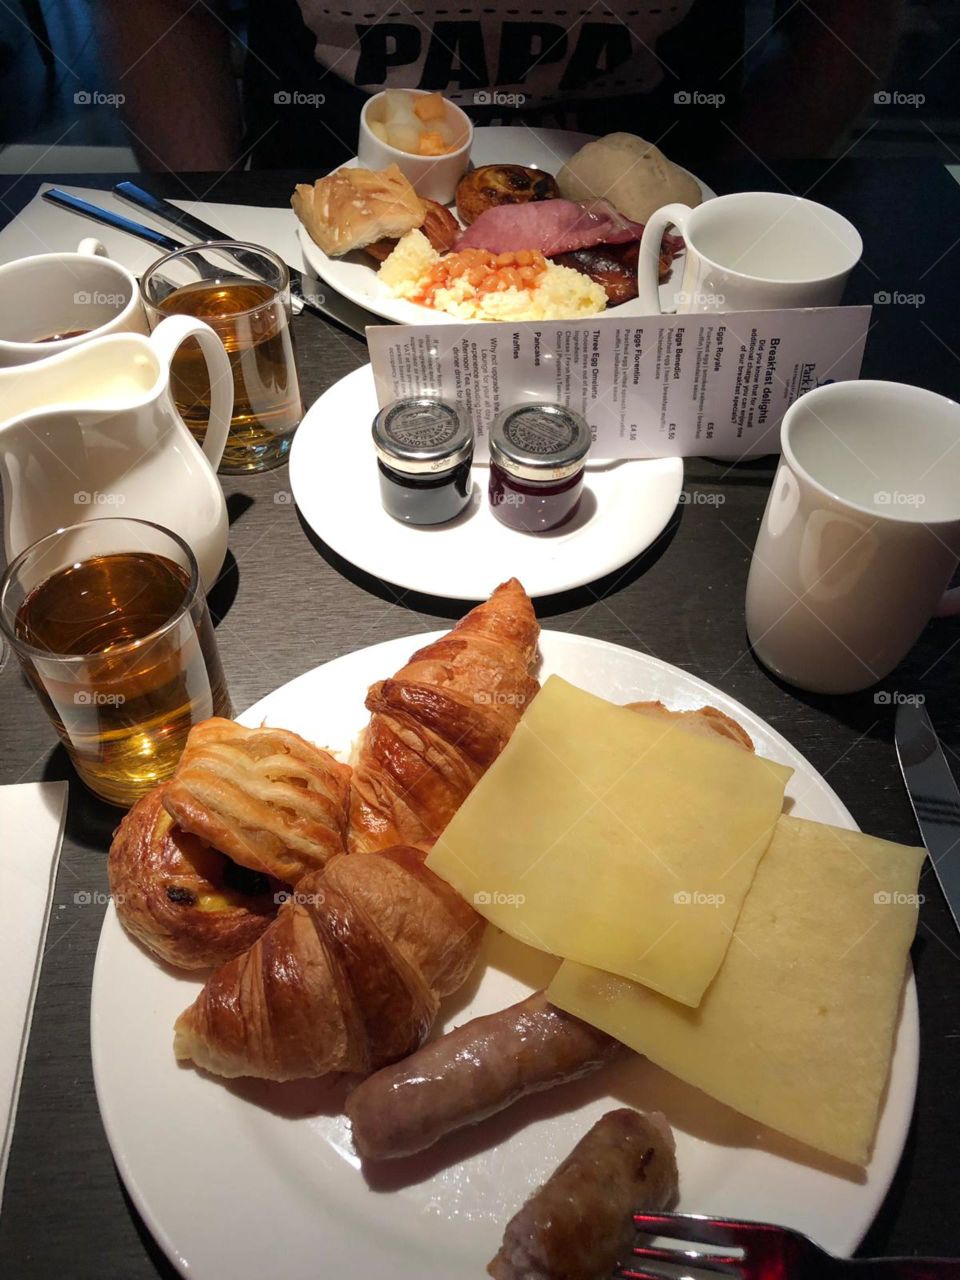 Breakfast with croissant and cheese